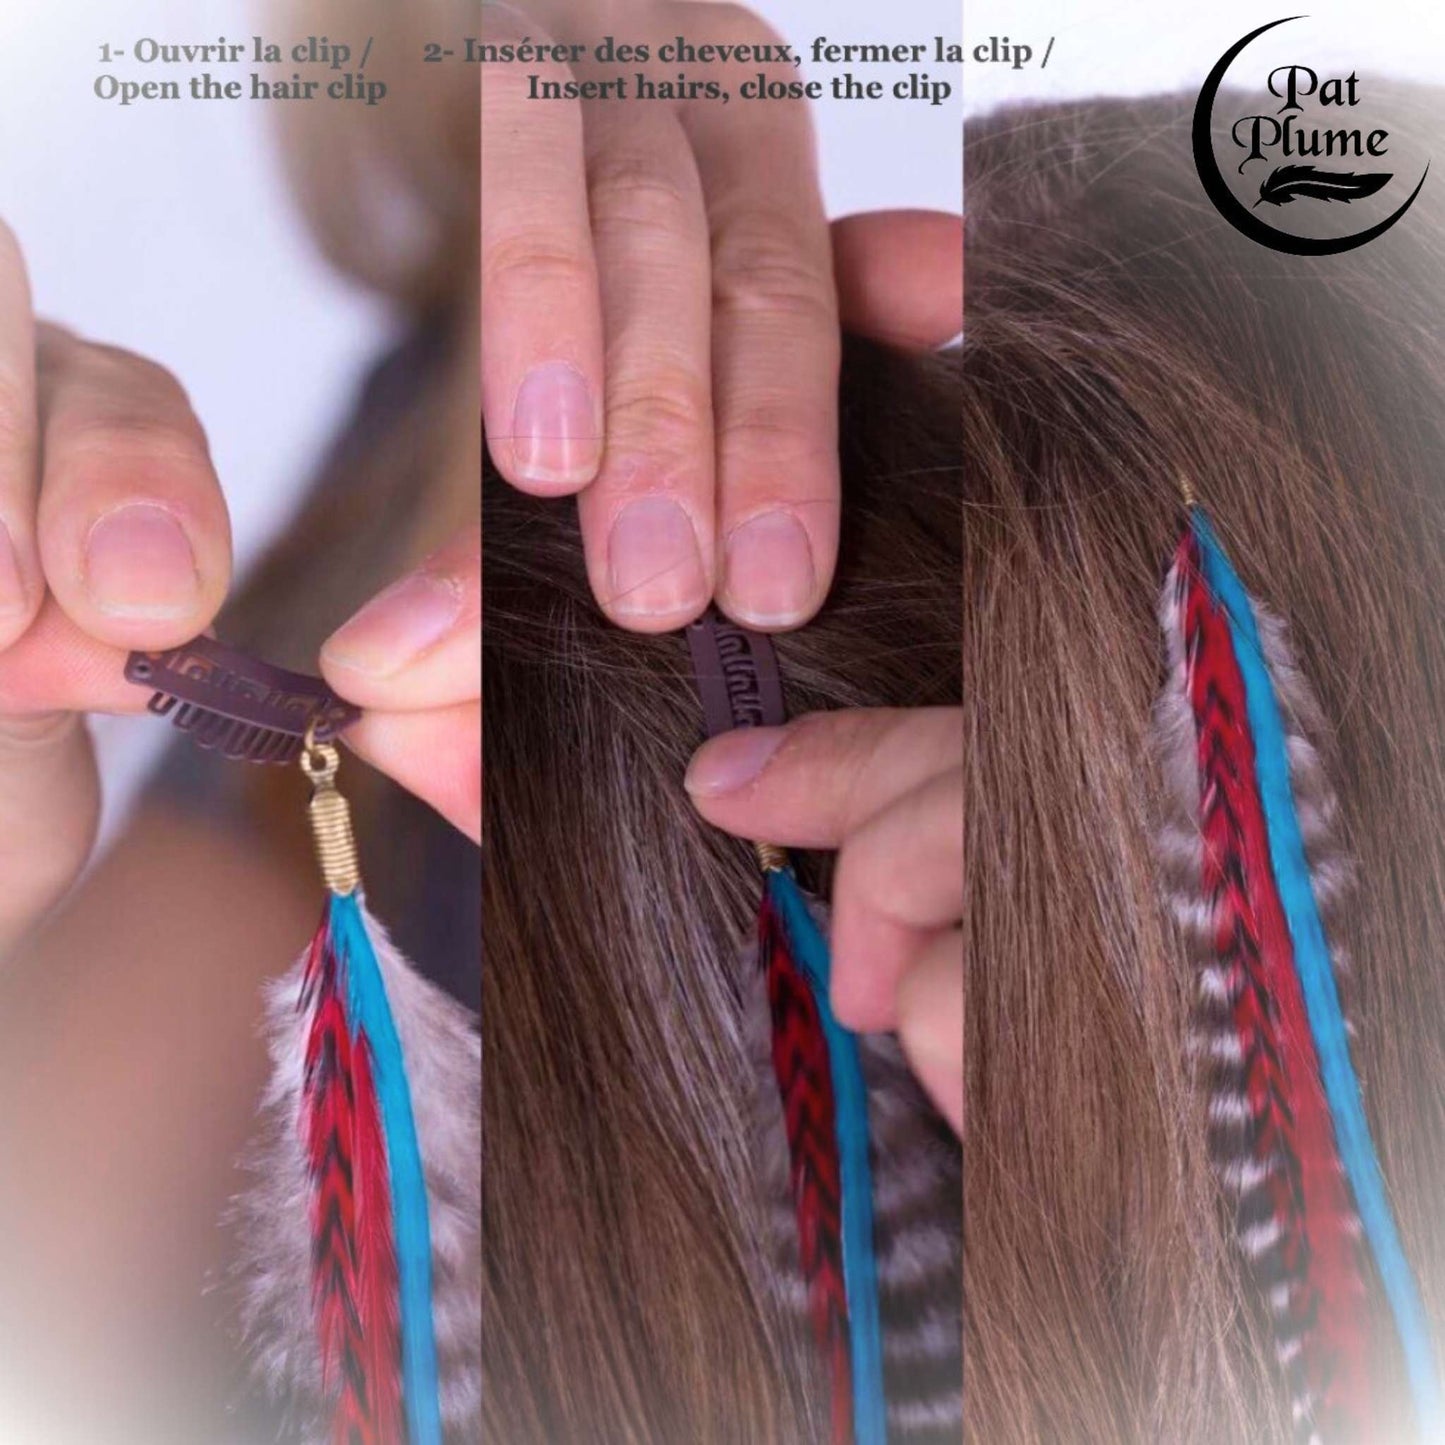 Custom Feather extensions - 3 feathers - Choose your own colors